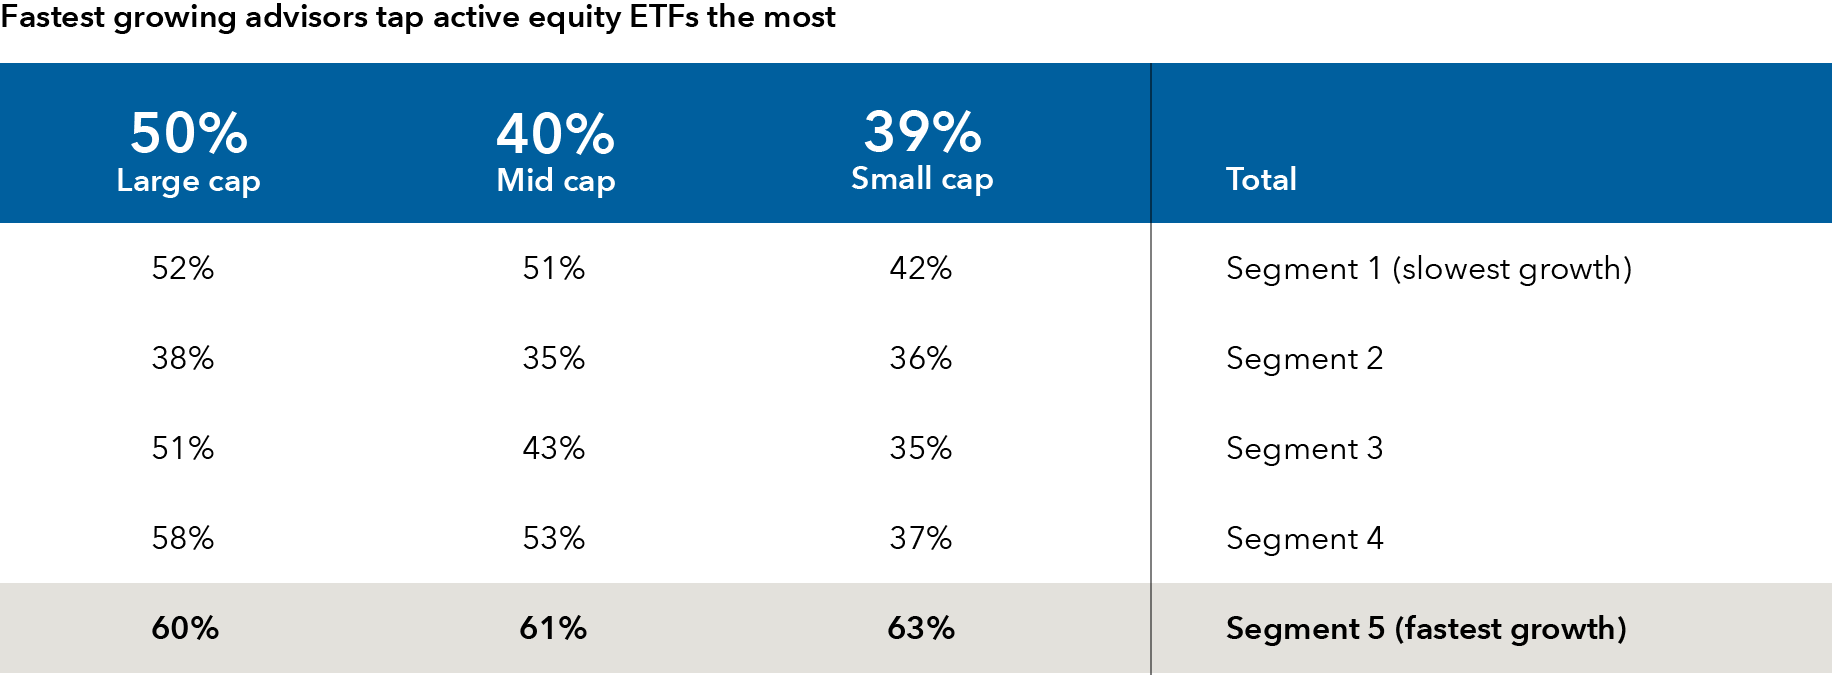 A table showing the percentage of advisors’ active ETF usage by market capitalization, from large cap to mid cap to small cap. In segment 1, which represents the slowest growth advisors in the study, the values were 52% for large cap, 51% for mid cap and 42% for small cap. In segment 2, the values were 38%, 35% and 36%. In segment 3, the values were 51%, 43% and 35%. In segment 4, the values were 58%, 53% and 37%. And in segment 5, which represents the fastest growth advisors, the values were 60%, 61% and 63%. Across all segments, the values were 50% for large cap, 46% for mid cap and 39% for small cap. 